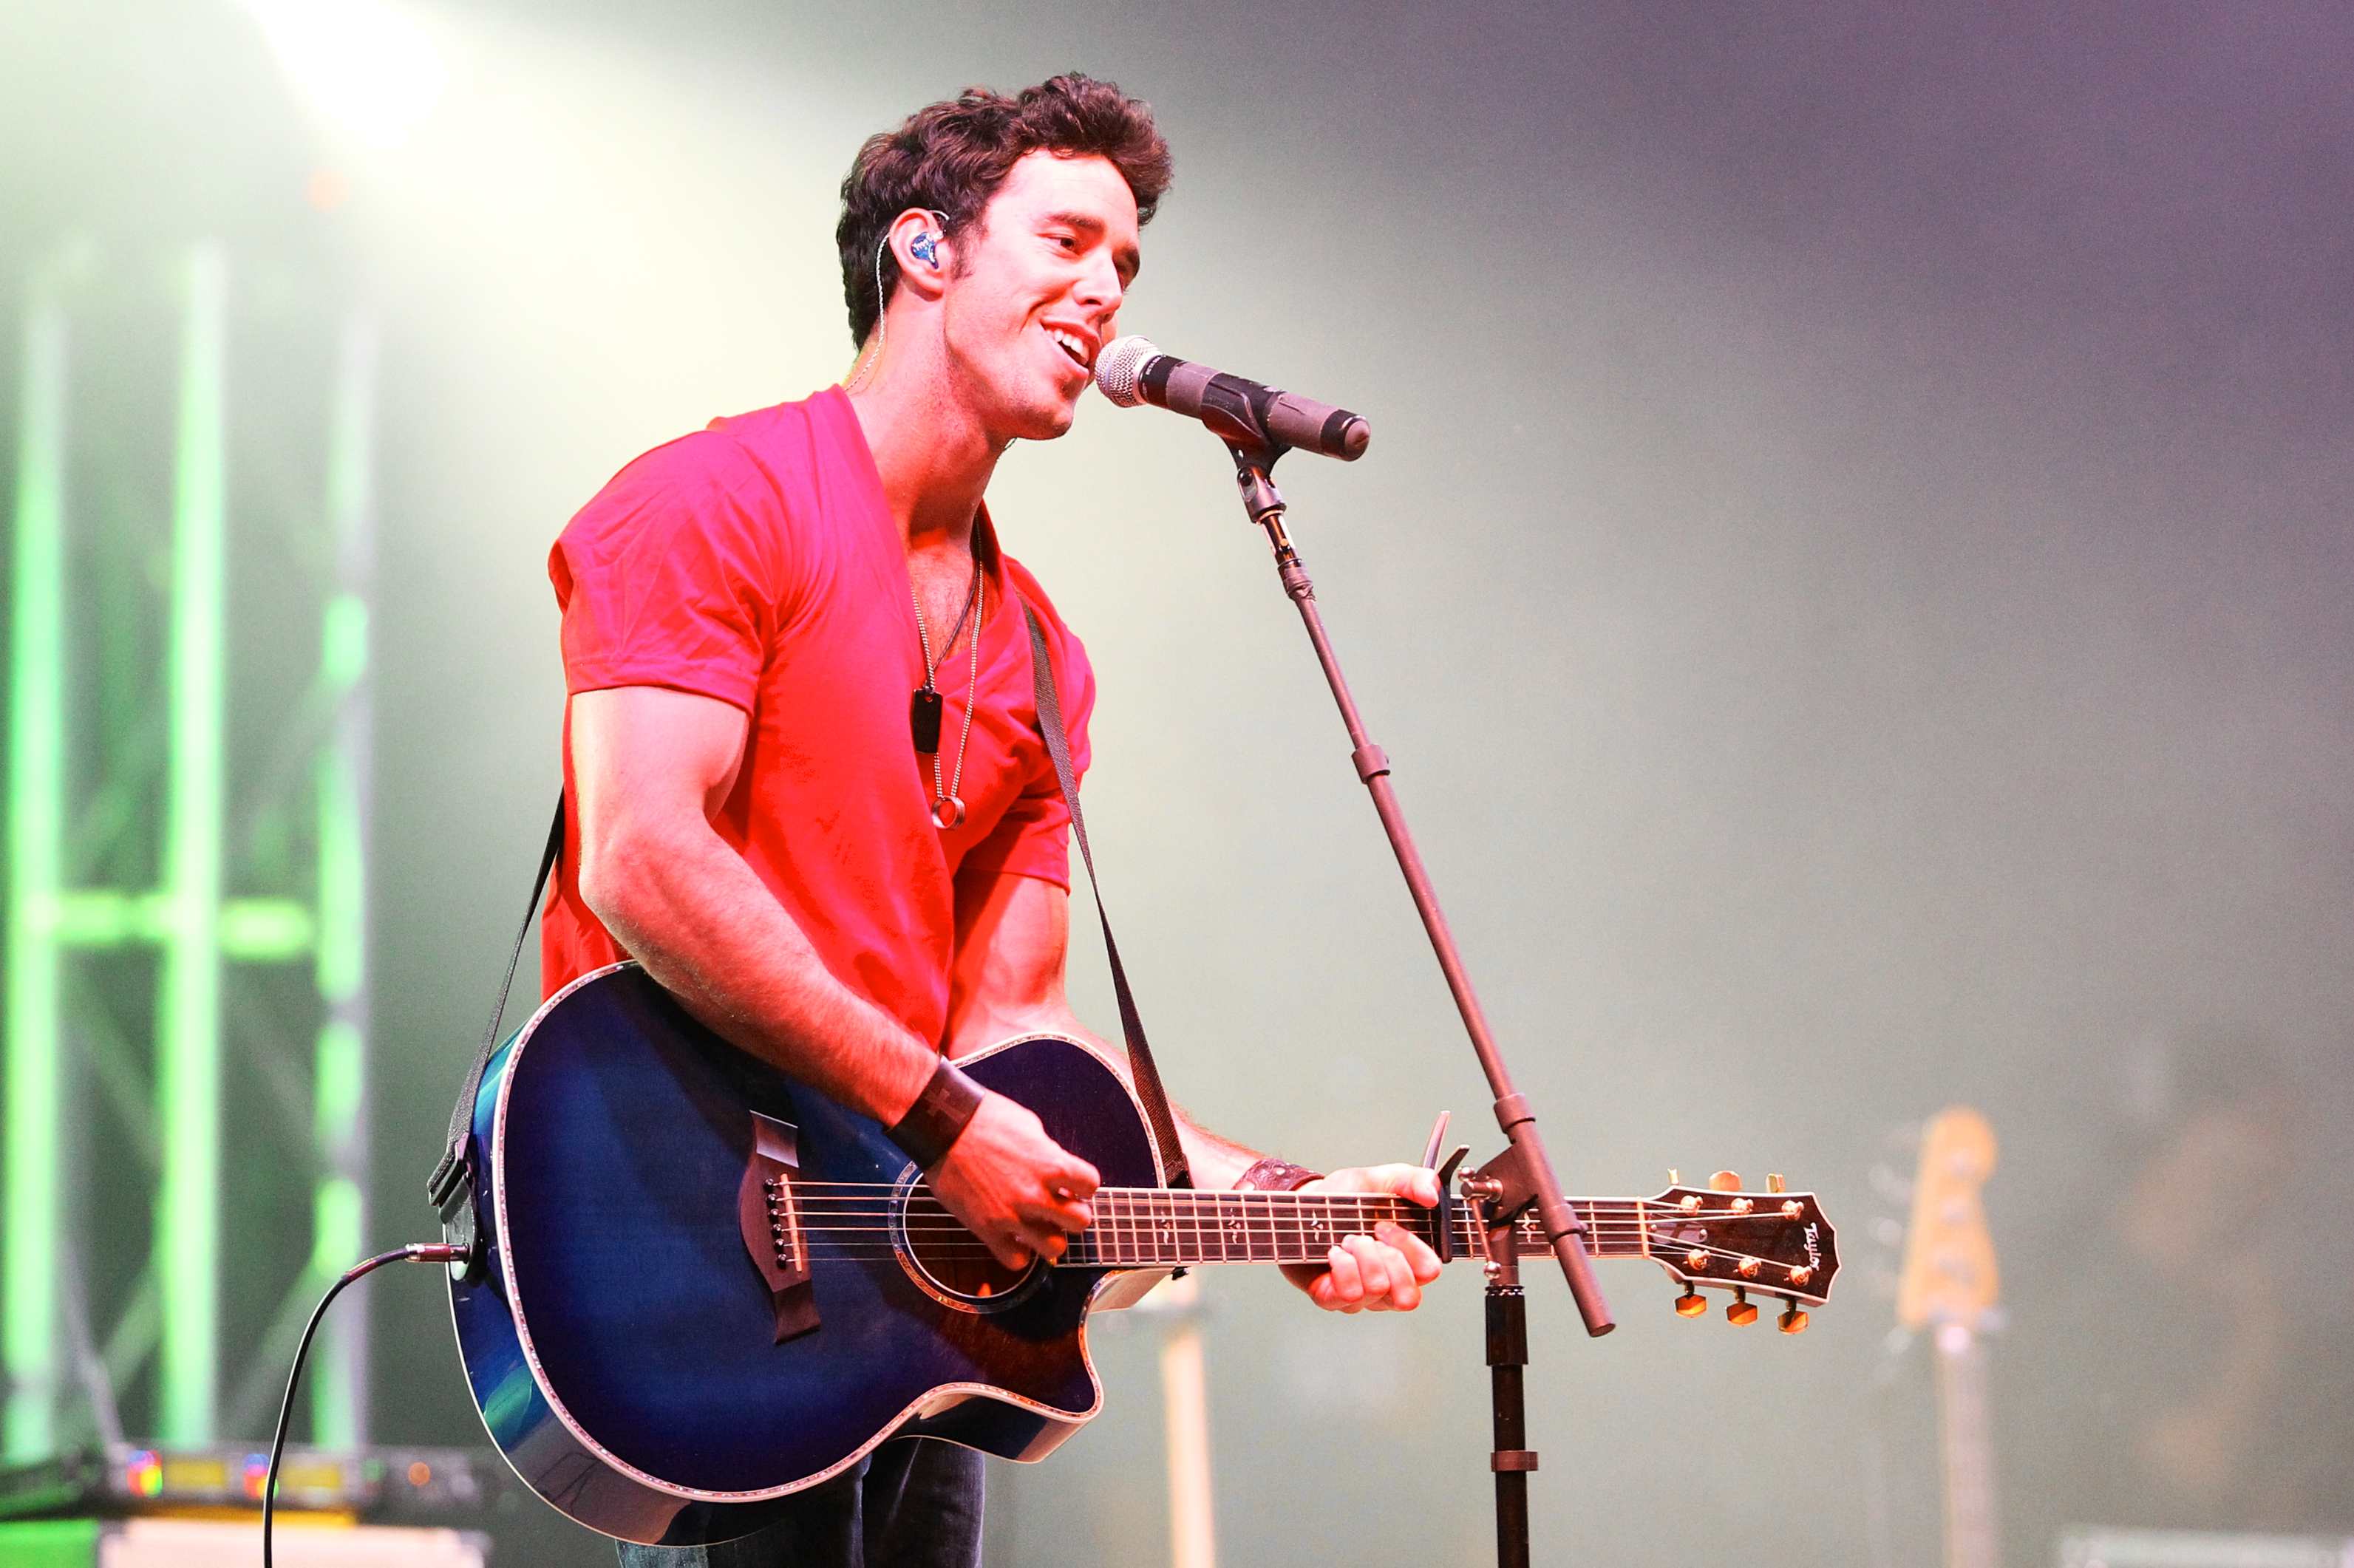 Craig Strickland of Backroad Anthem entertains the fans late into the night in Ozark, Arkansas on June 7, 2013. (Richey Miller—AP)